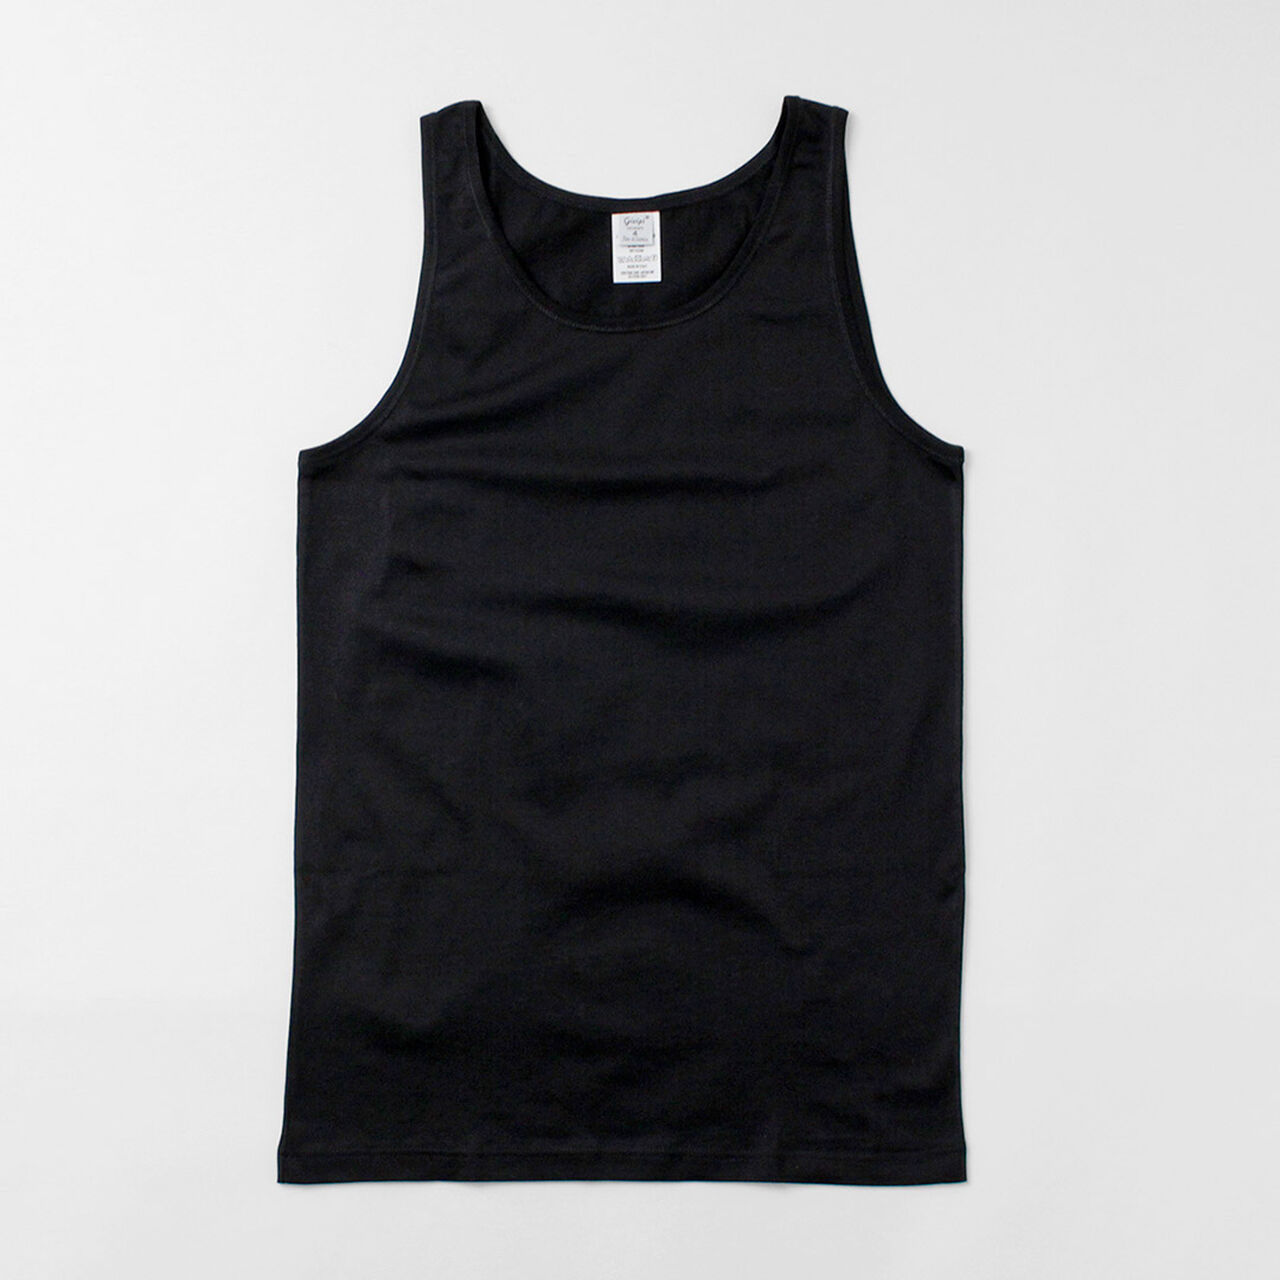 Maggiore Basic Tank Top,Nero, large image number 0